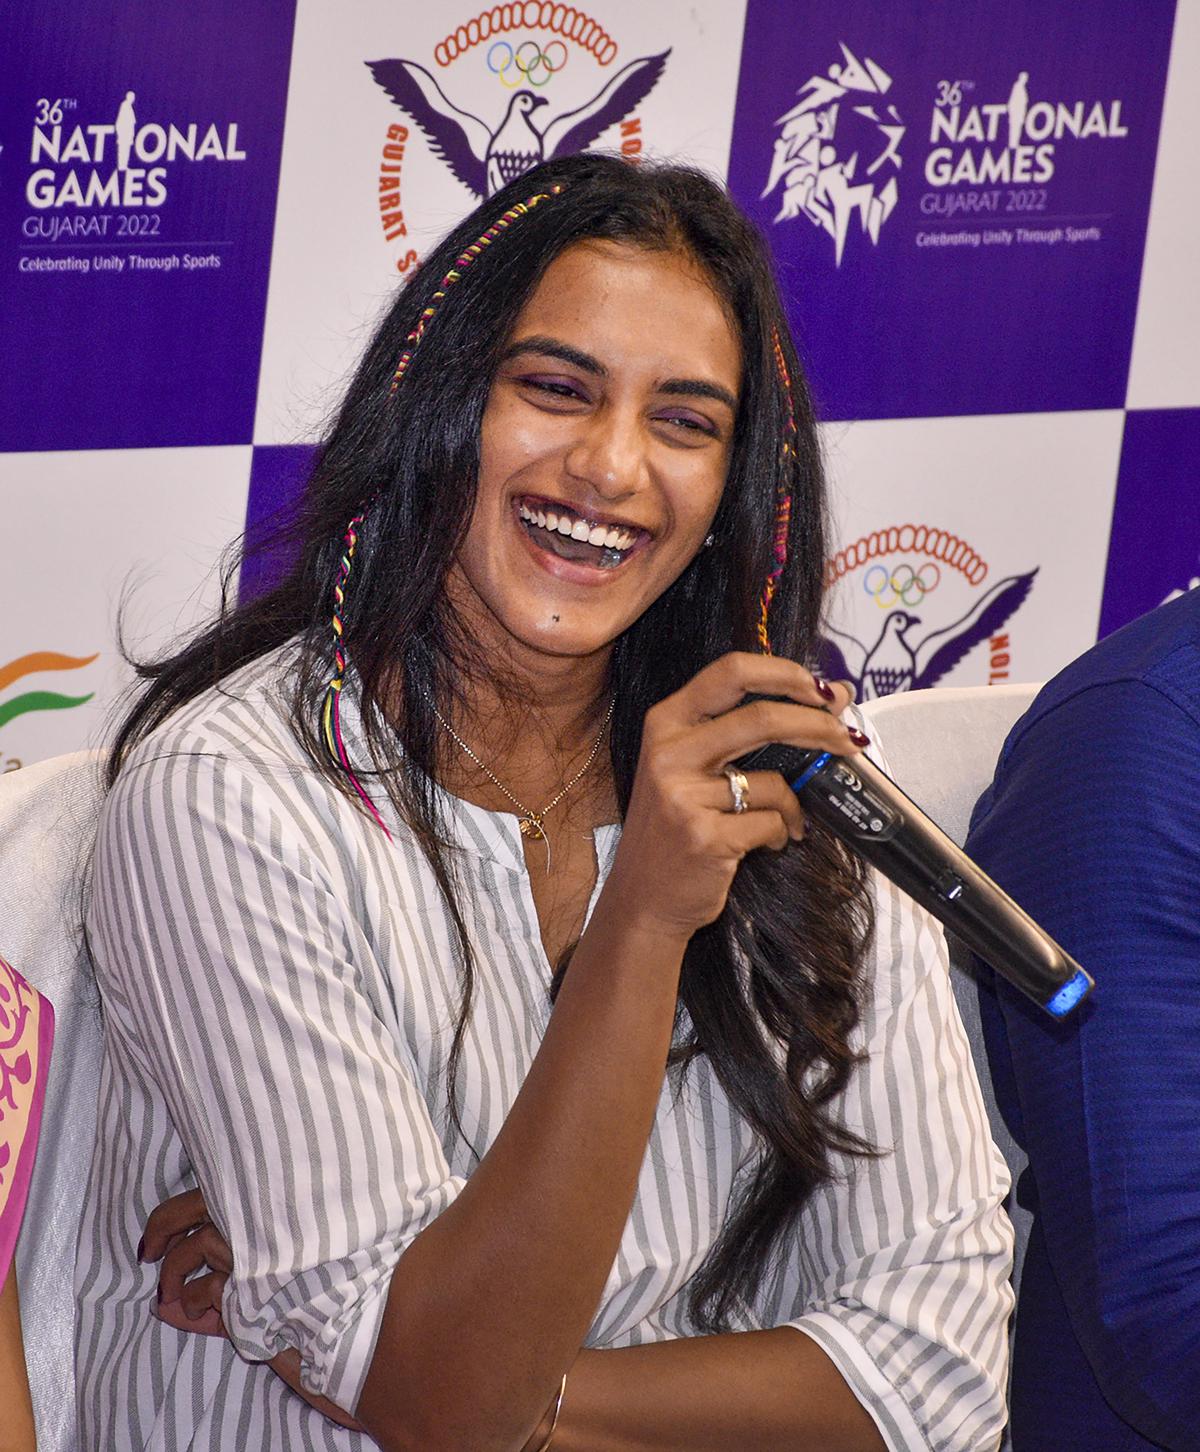 The best National Games I have ever seen, says Sindhu